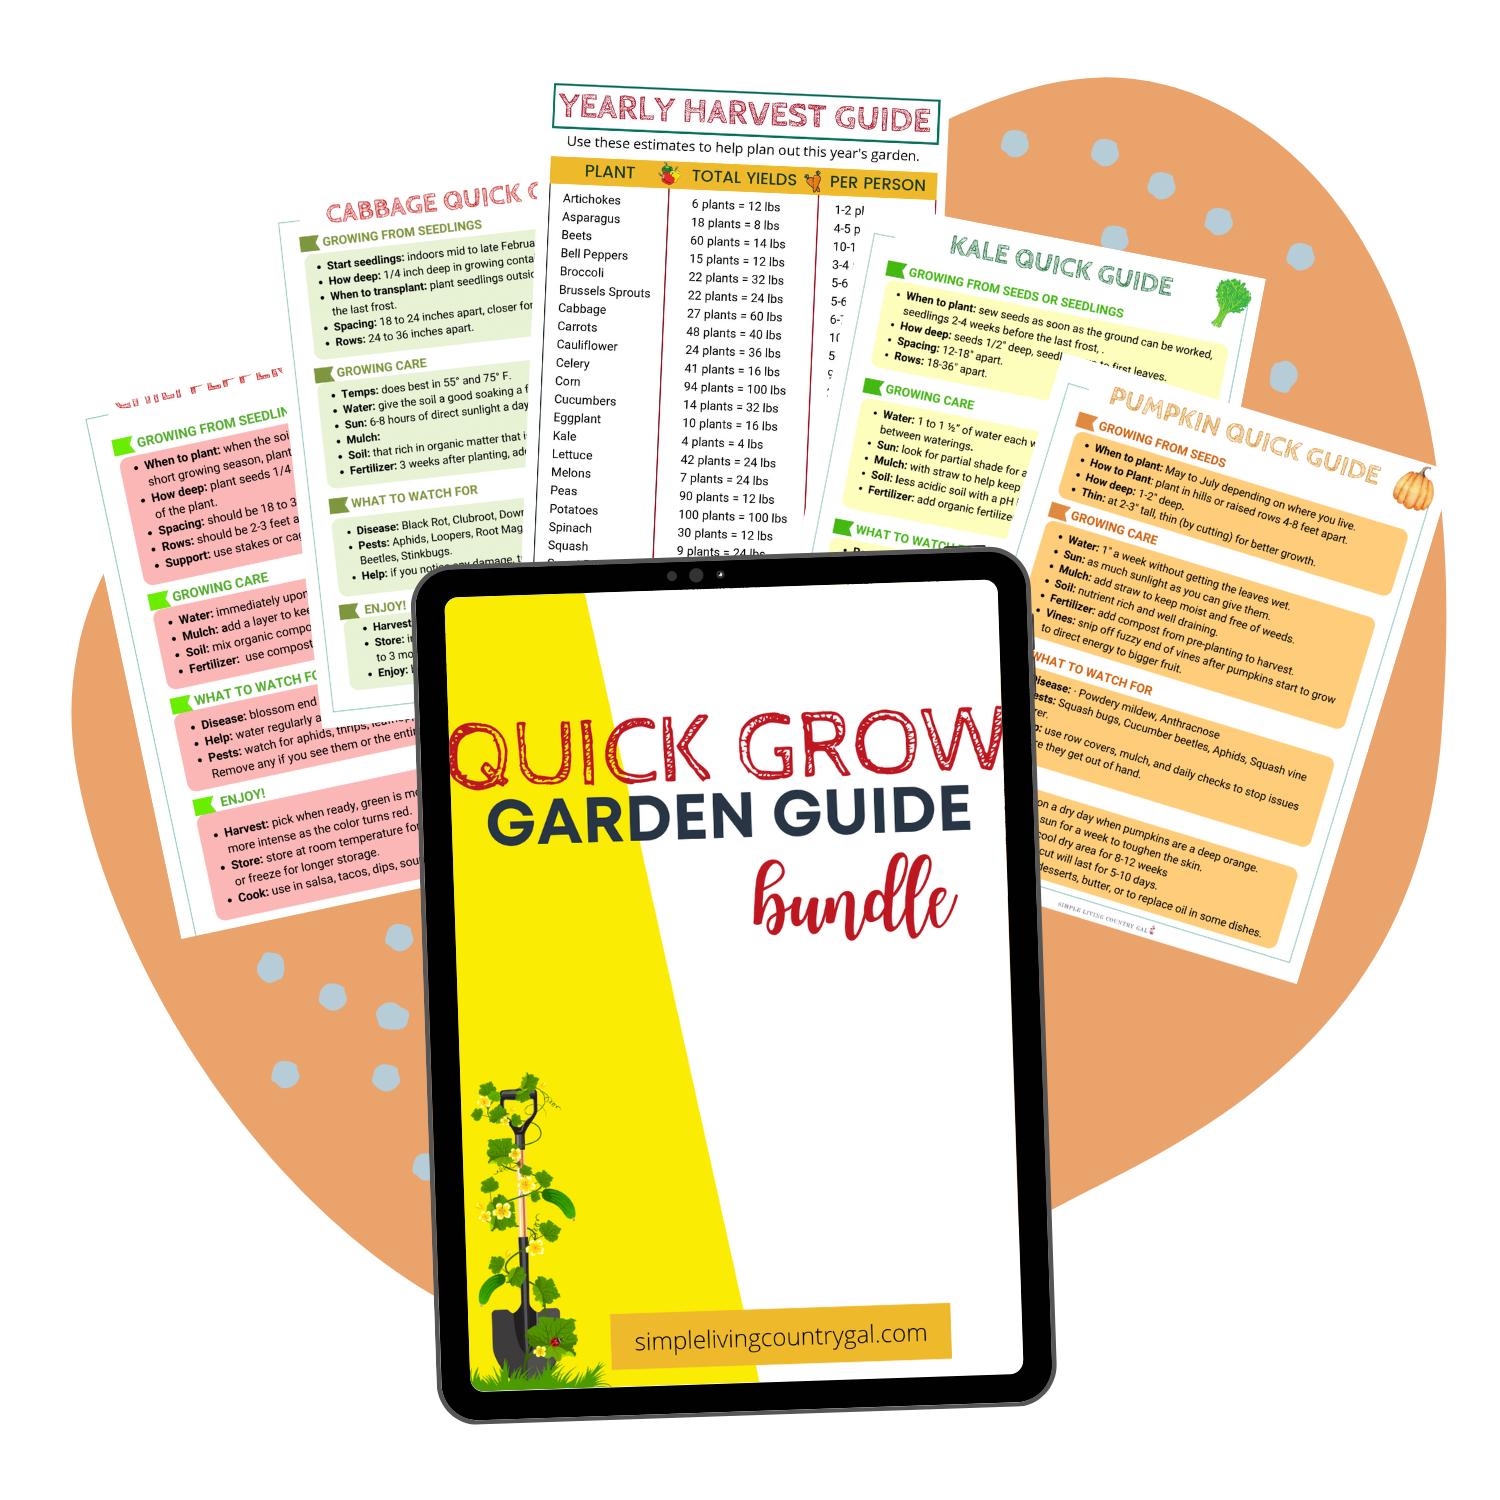 Quick Grow Garden Guide Bundle YELLOW Edition {12 pages}